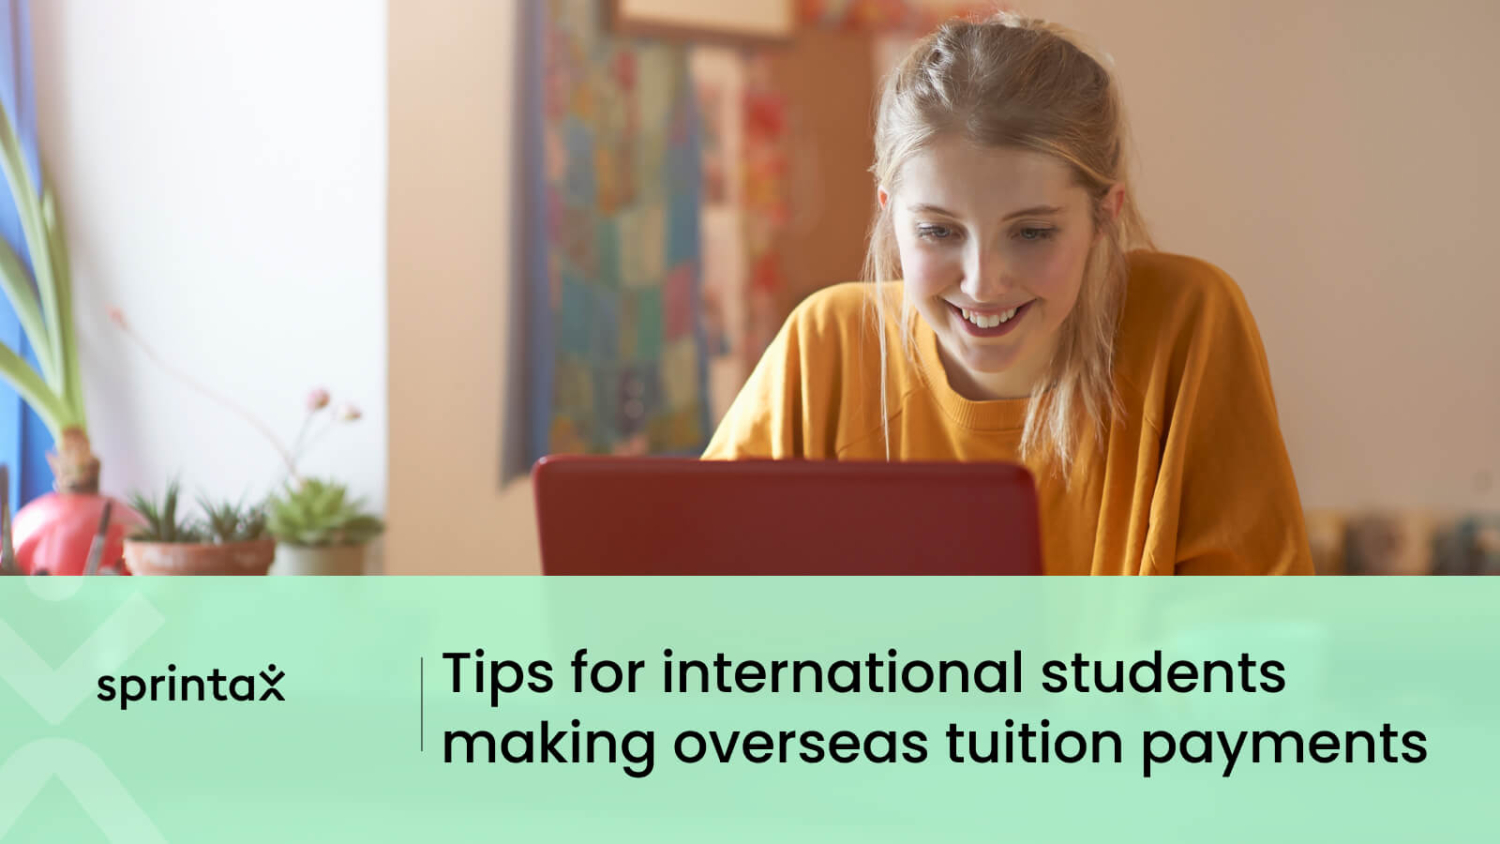 Making overseas tuition payments